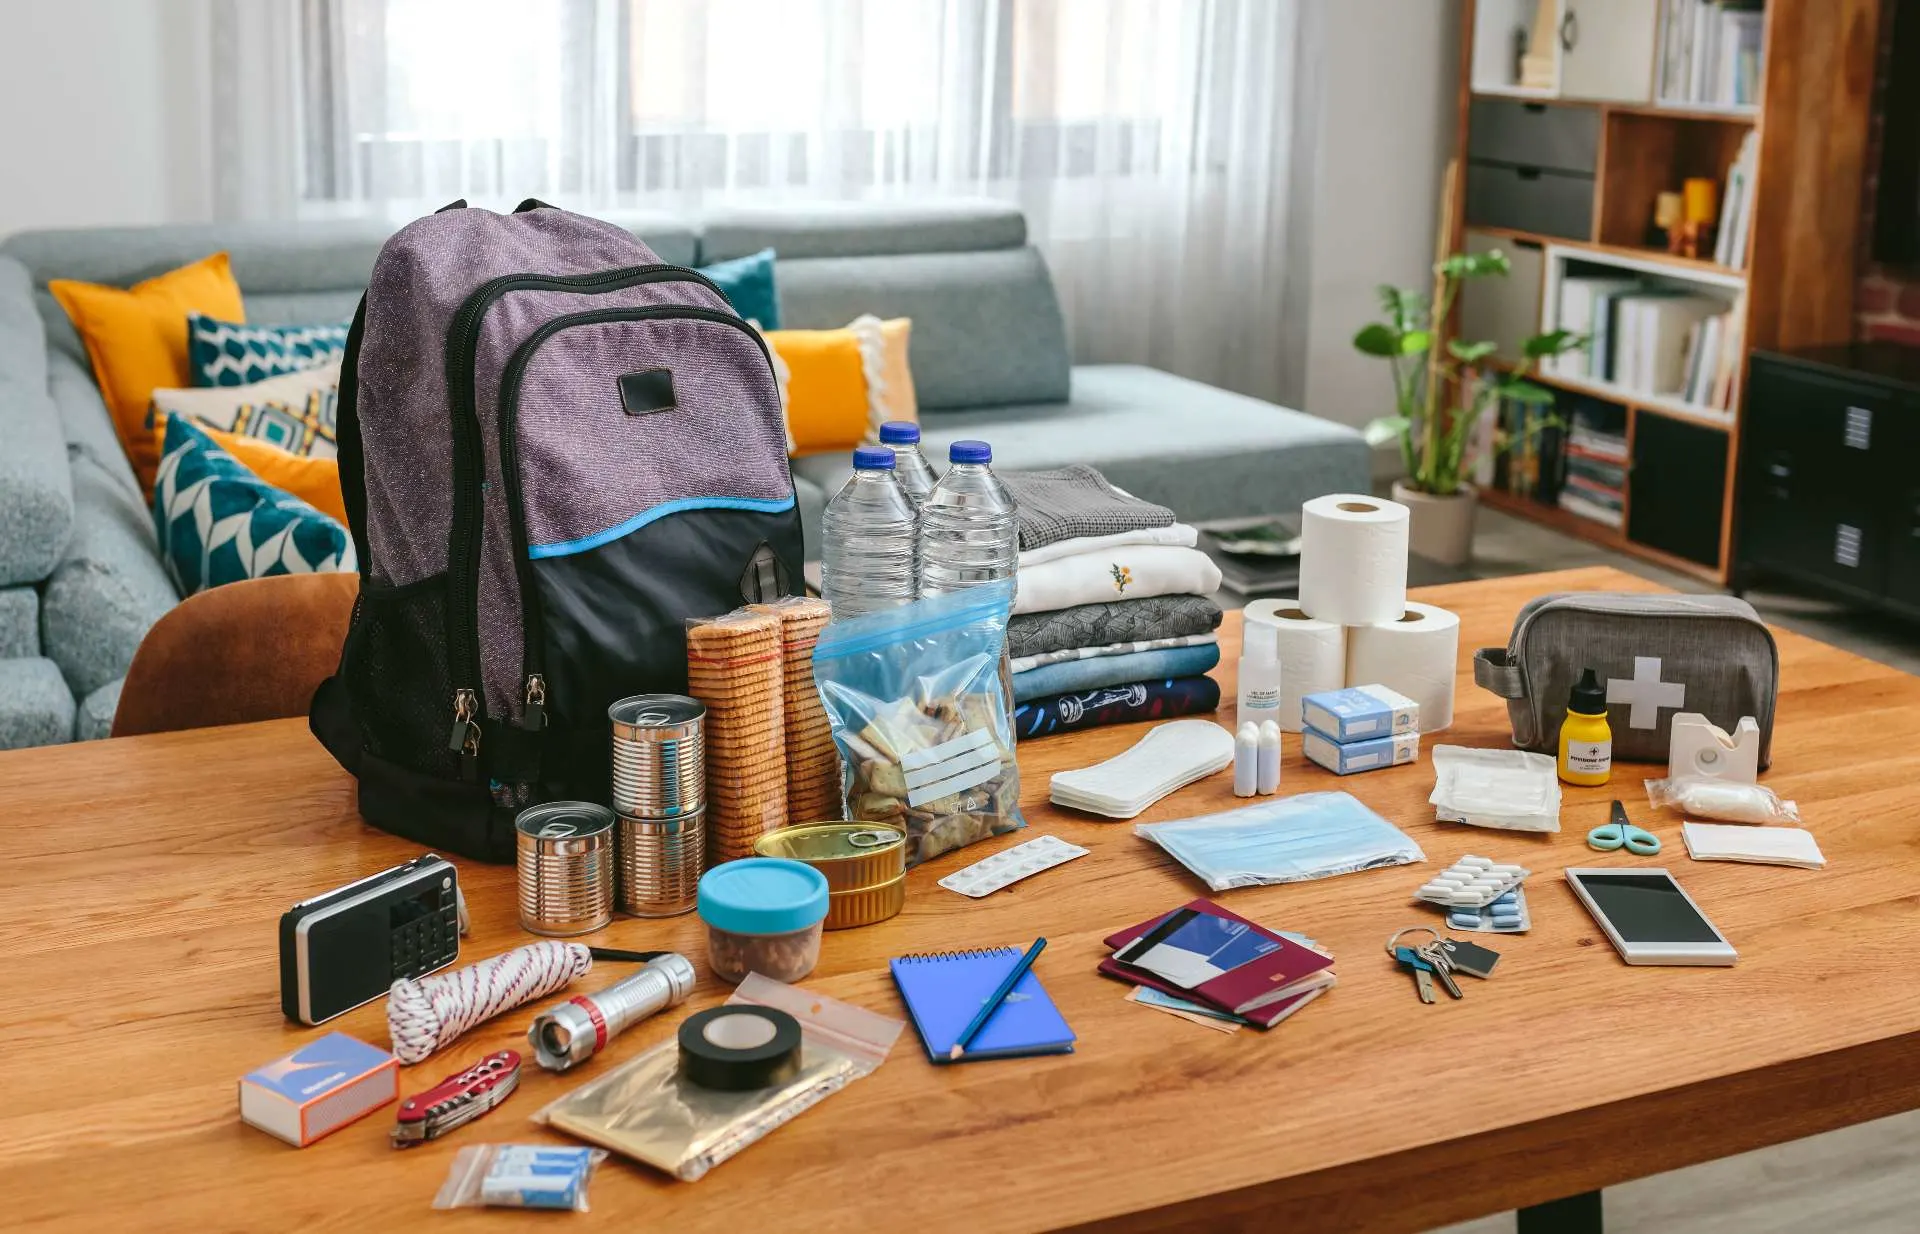 backpack and emergency supplies laid out on table